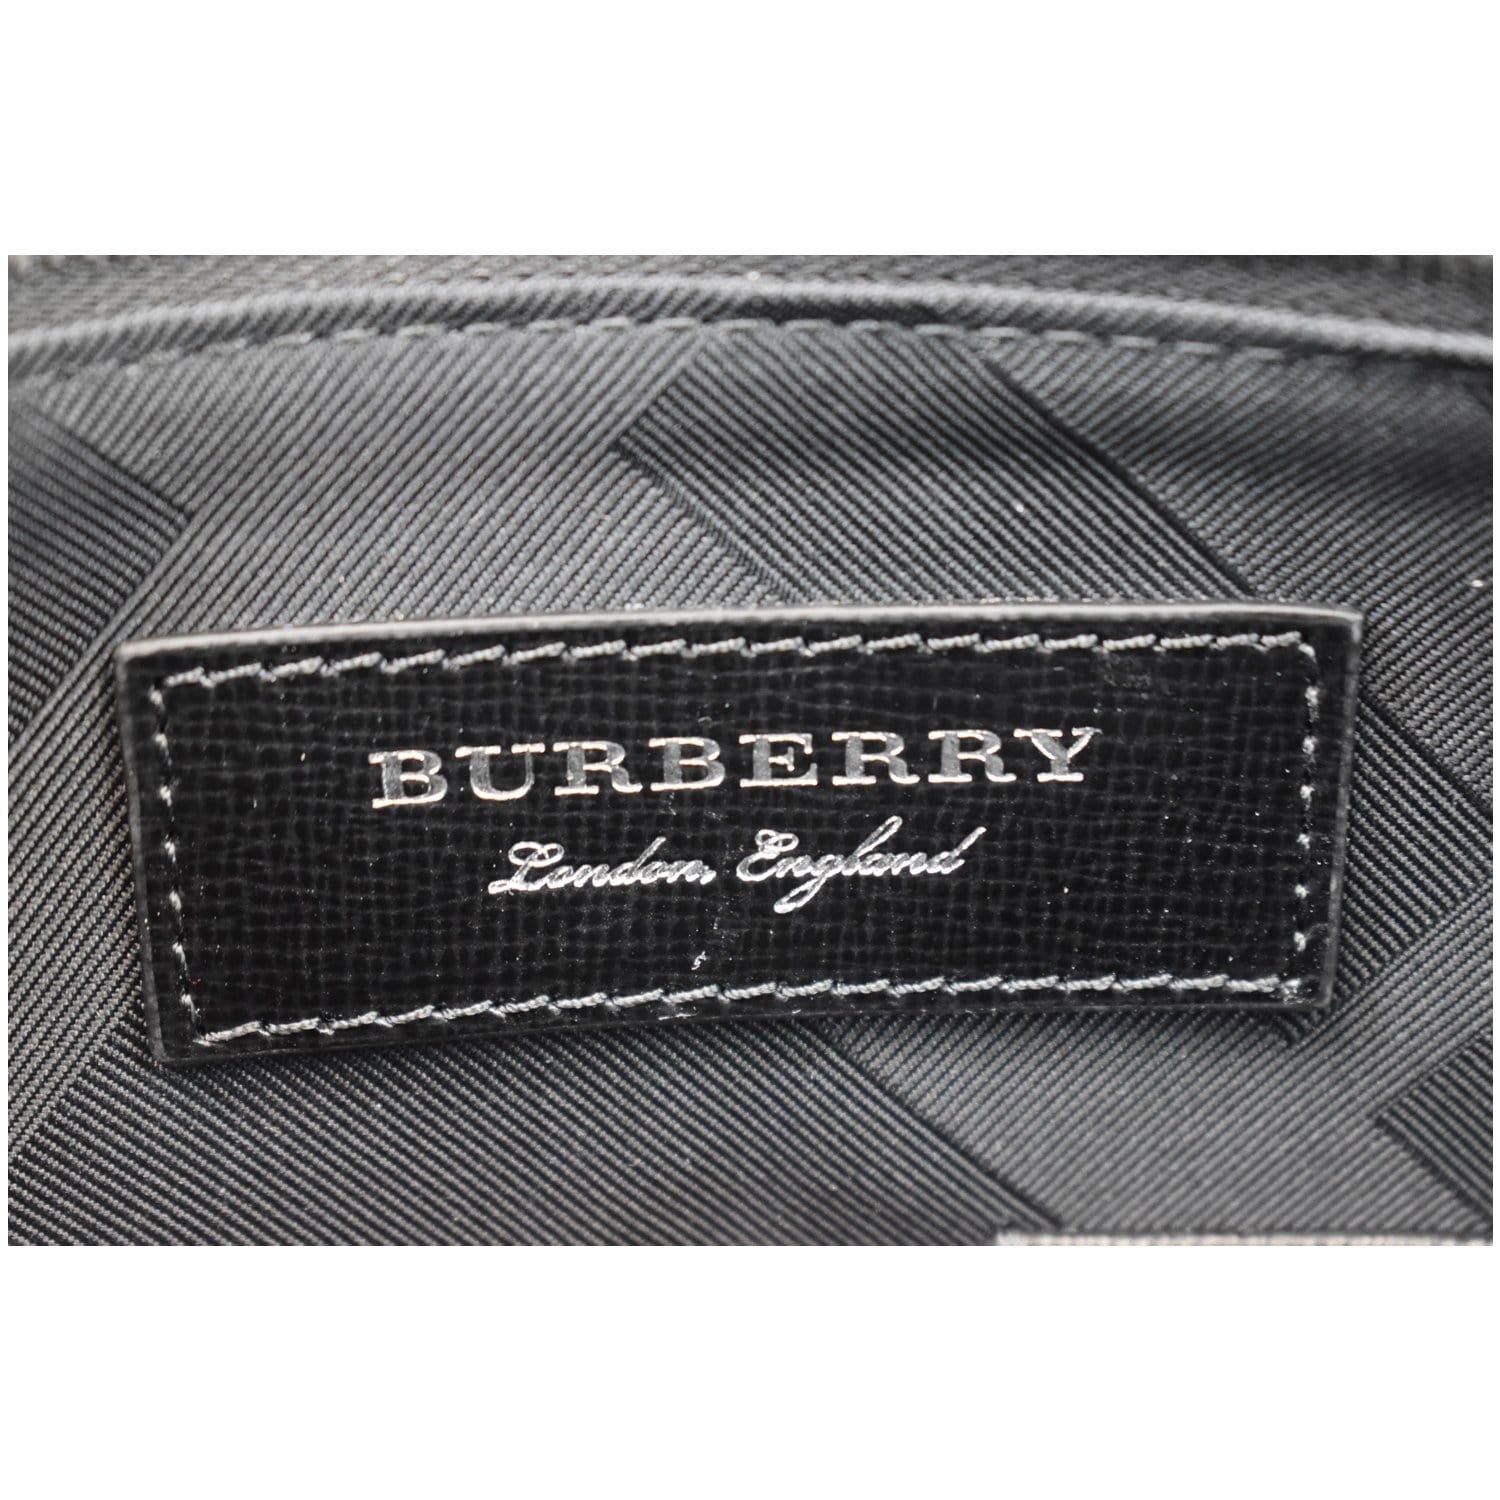 Burberry hand bag real vs fake review. How to spot counterfeit Burberry  London bag 